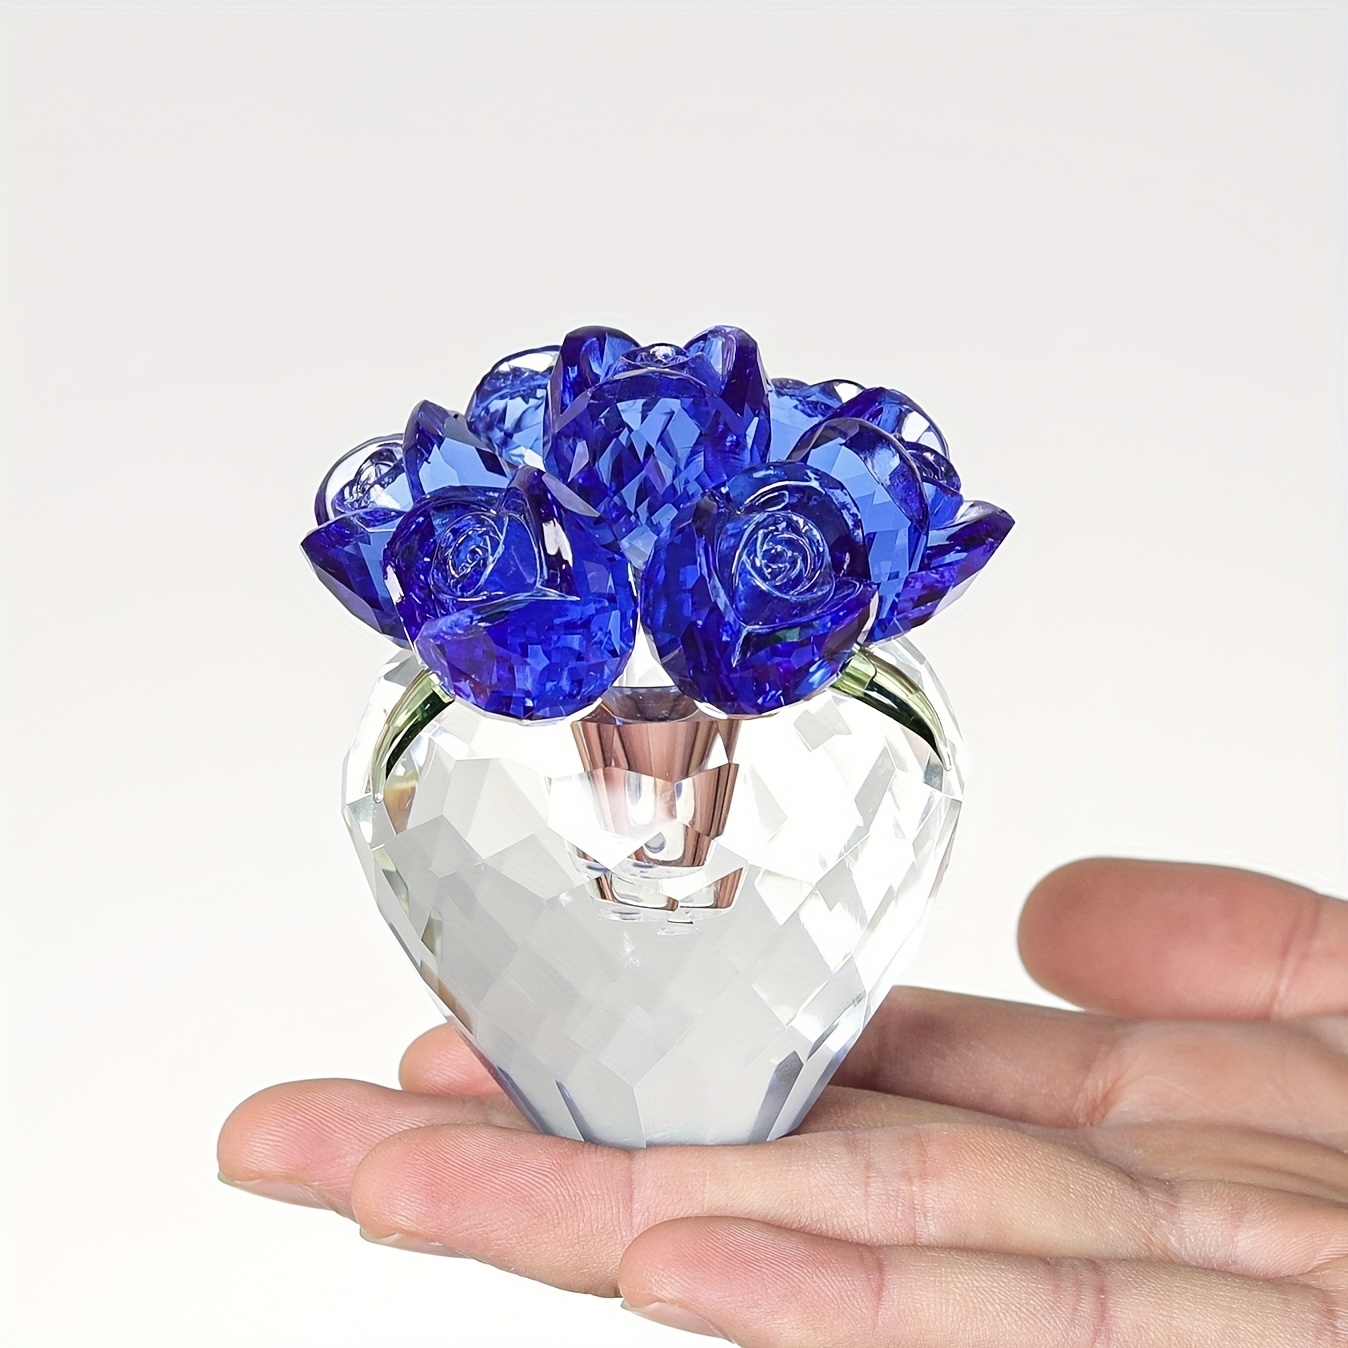 Waterford Glass Rose Waterford Lavender Glass Rose | 1-800-Flowers Flowers Delivery | 97712L